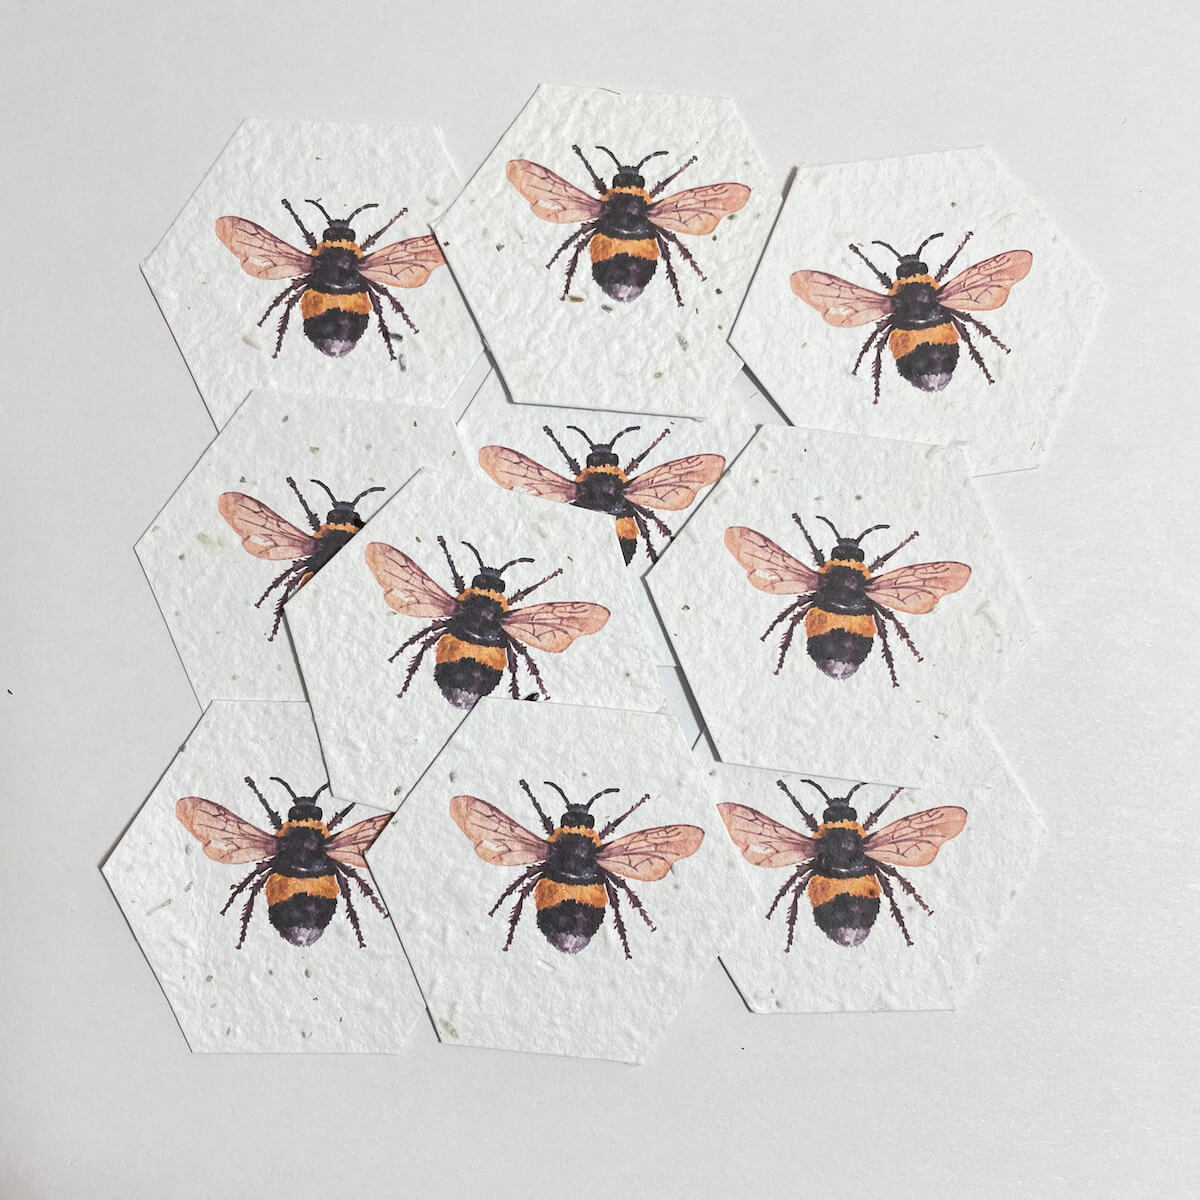 seed paper hexagons with printed bees